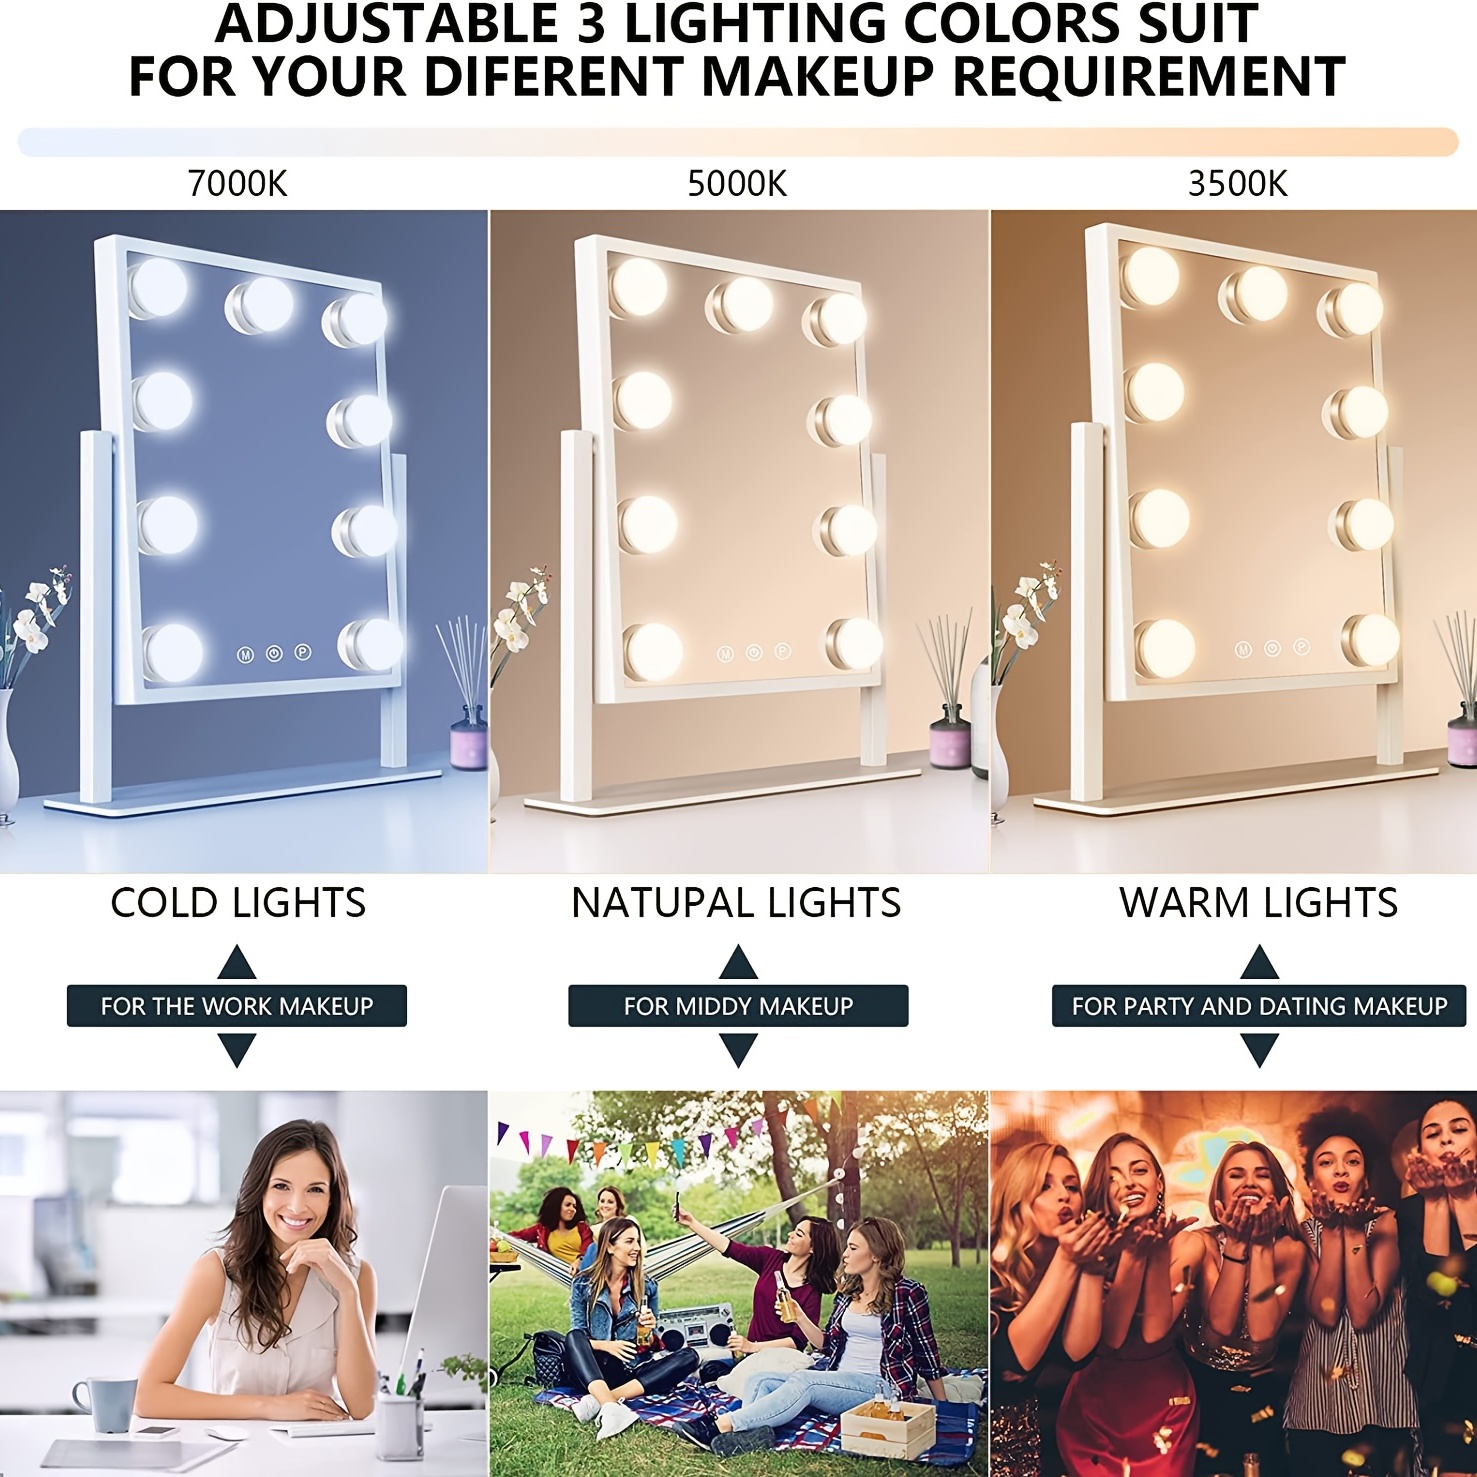 MiroFan Vanity Mirror with Lights Hollywood Mirror Lighted Makeup Mirror  with Dimmable&3 Color Modes Lights, 9 LED Bulbles with Detachable 10X